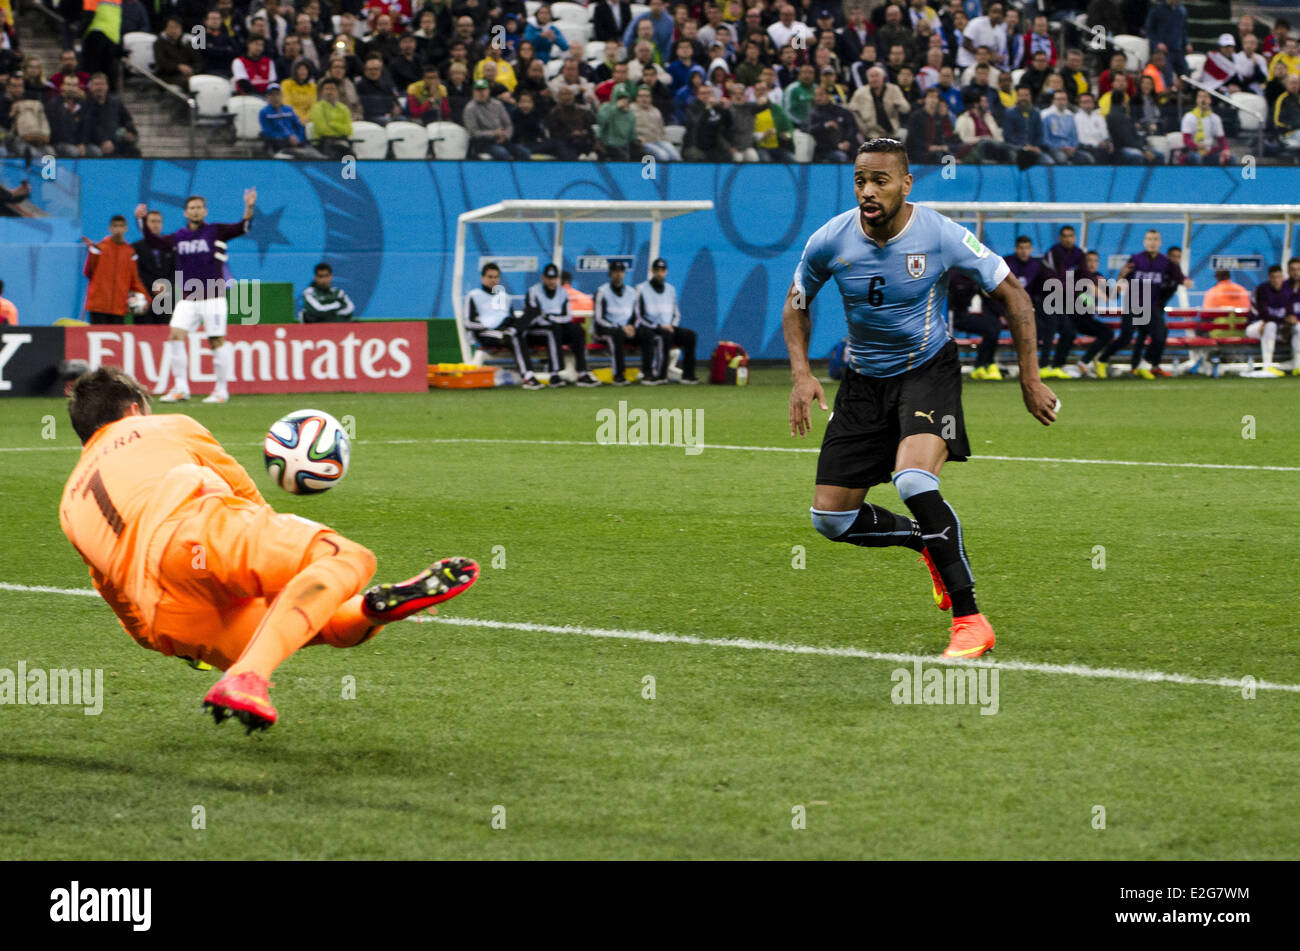 Sao Paolo, Brazil. 19th June, 2014. Fernando Muslera (1) defends Wayne Rooney's (1)0) kick watched by Alvaro Pereira (6) at the match #23 of the 2014 World Cup, between England and Uruguay, this Thursday, June 19th, in Sao Paulo, Brasil Credit:  Gustavo Basso/NurPhoto/ZUMAPRESS.com/Alamy Live News Stock Photo